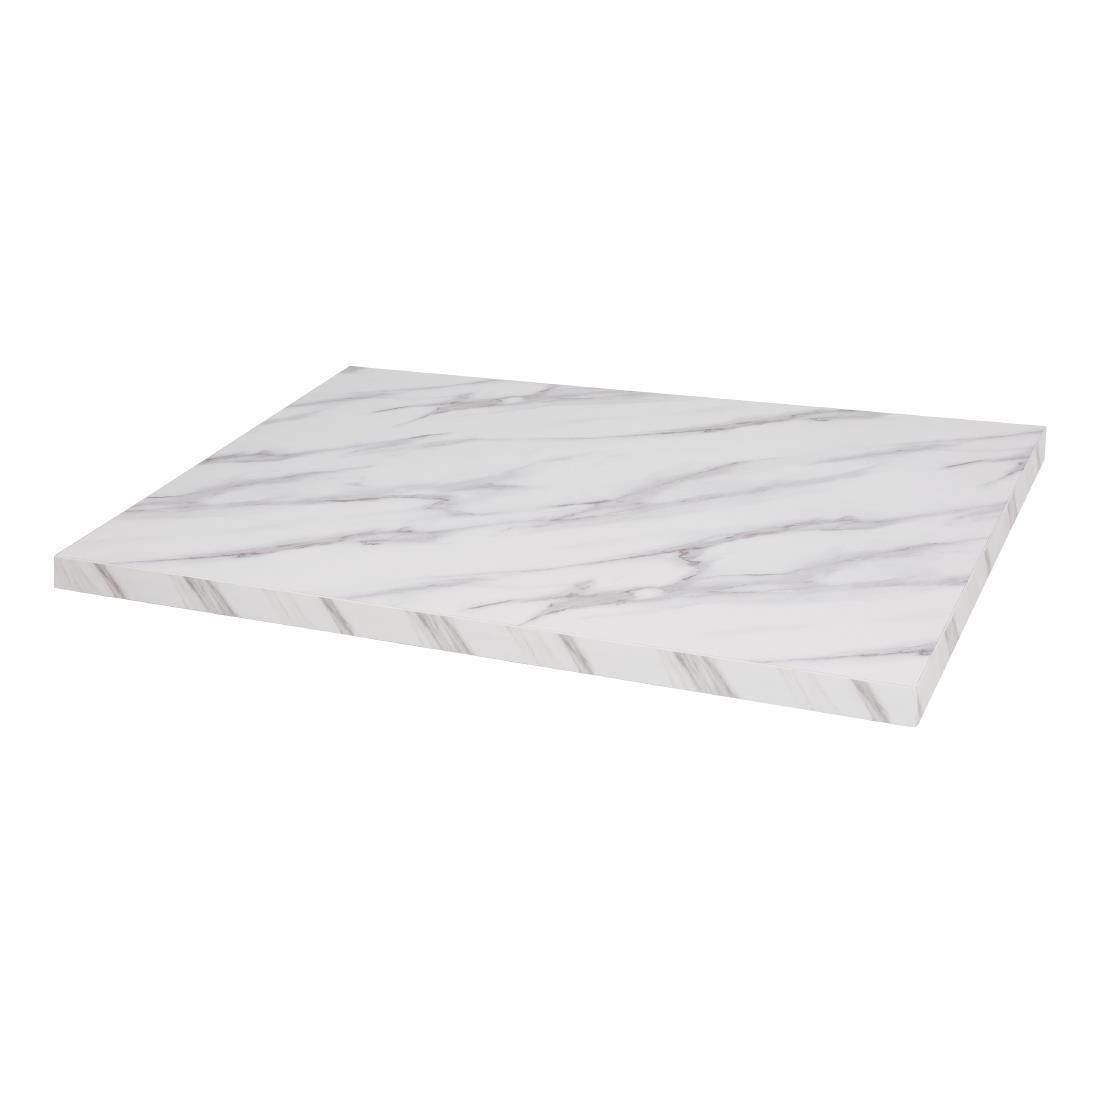 Bolero Pre-Drilled Rectangular Table Top Marble Effect 700mm - DT447  - 1